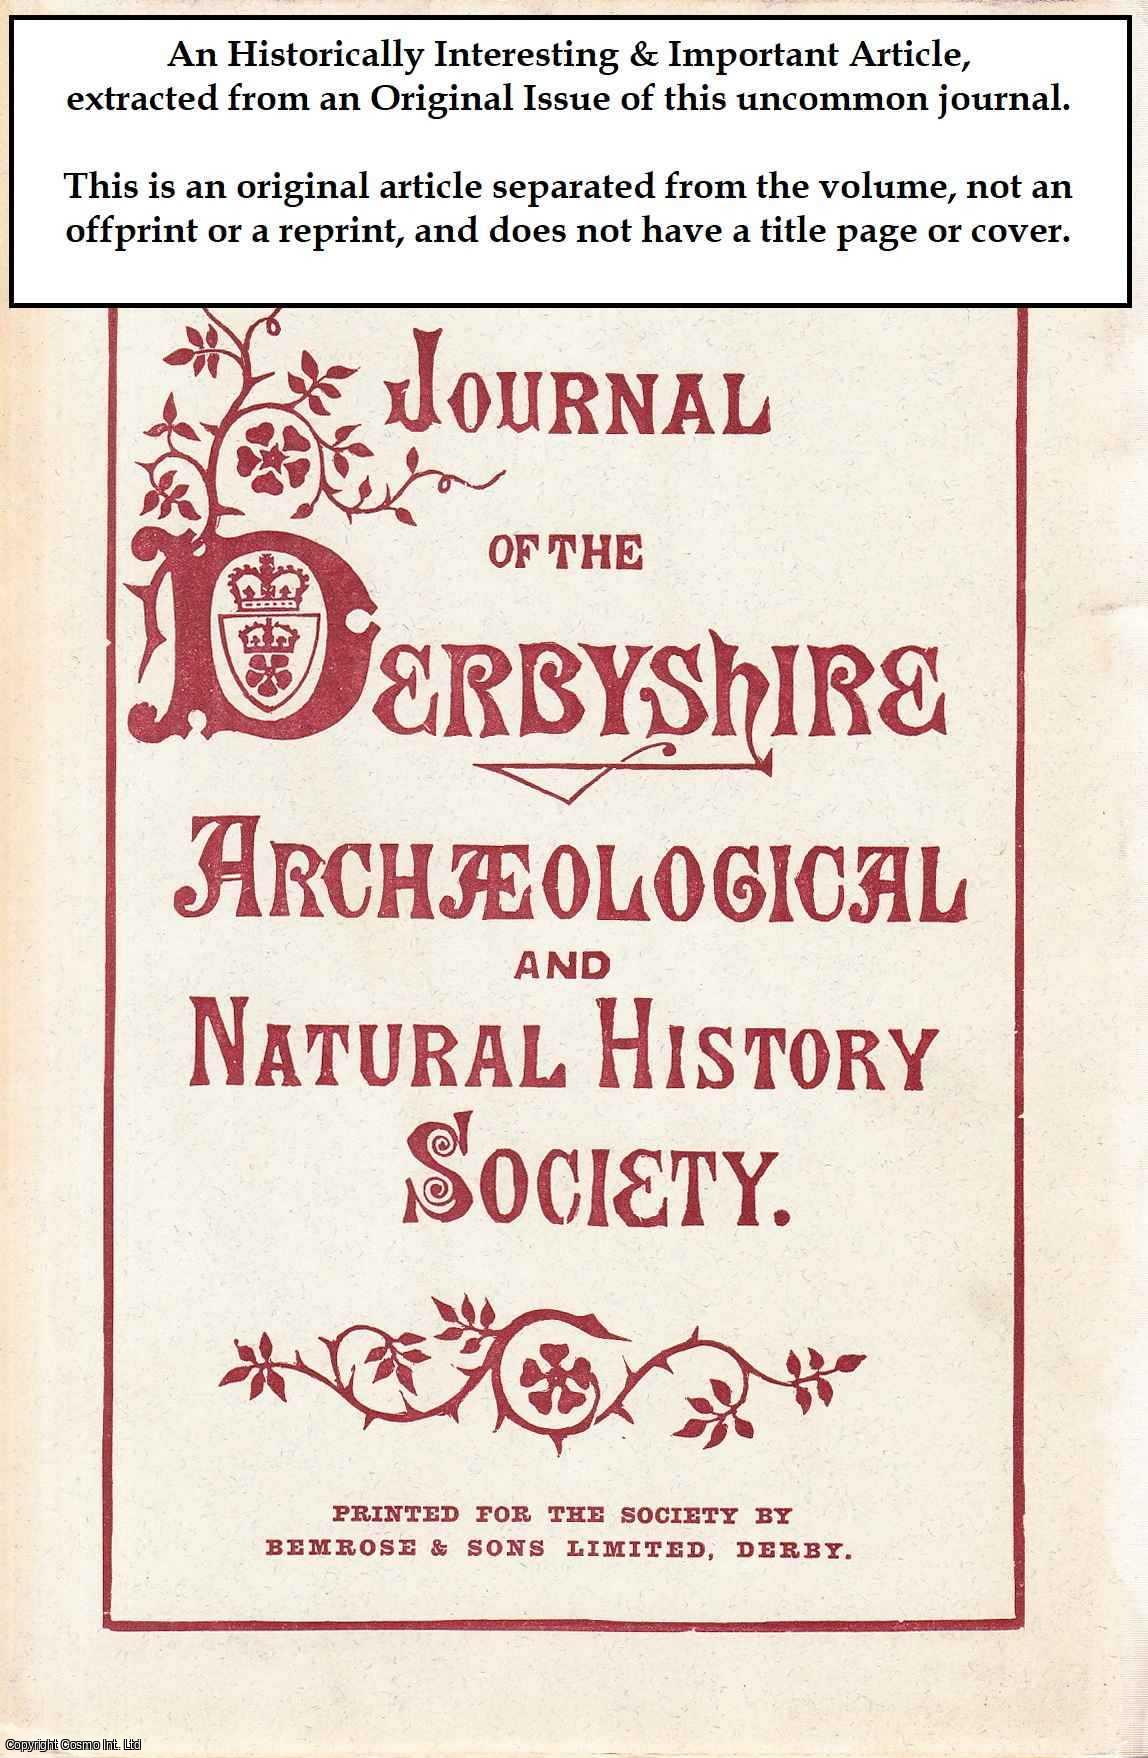 J. Horace Round - The Origin of The Shirleys and of The Gresleys. An original article from the Journal of the Derbyshire Archaeological & Natural History Society, 1905.